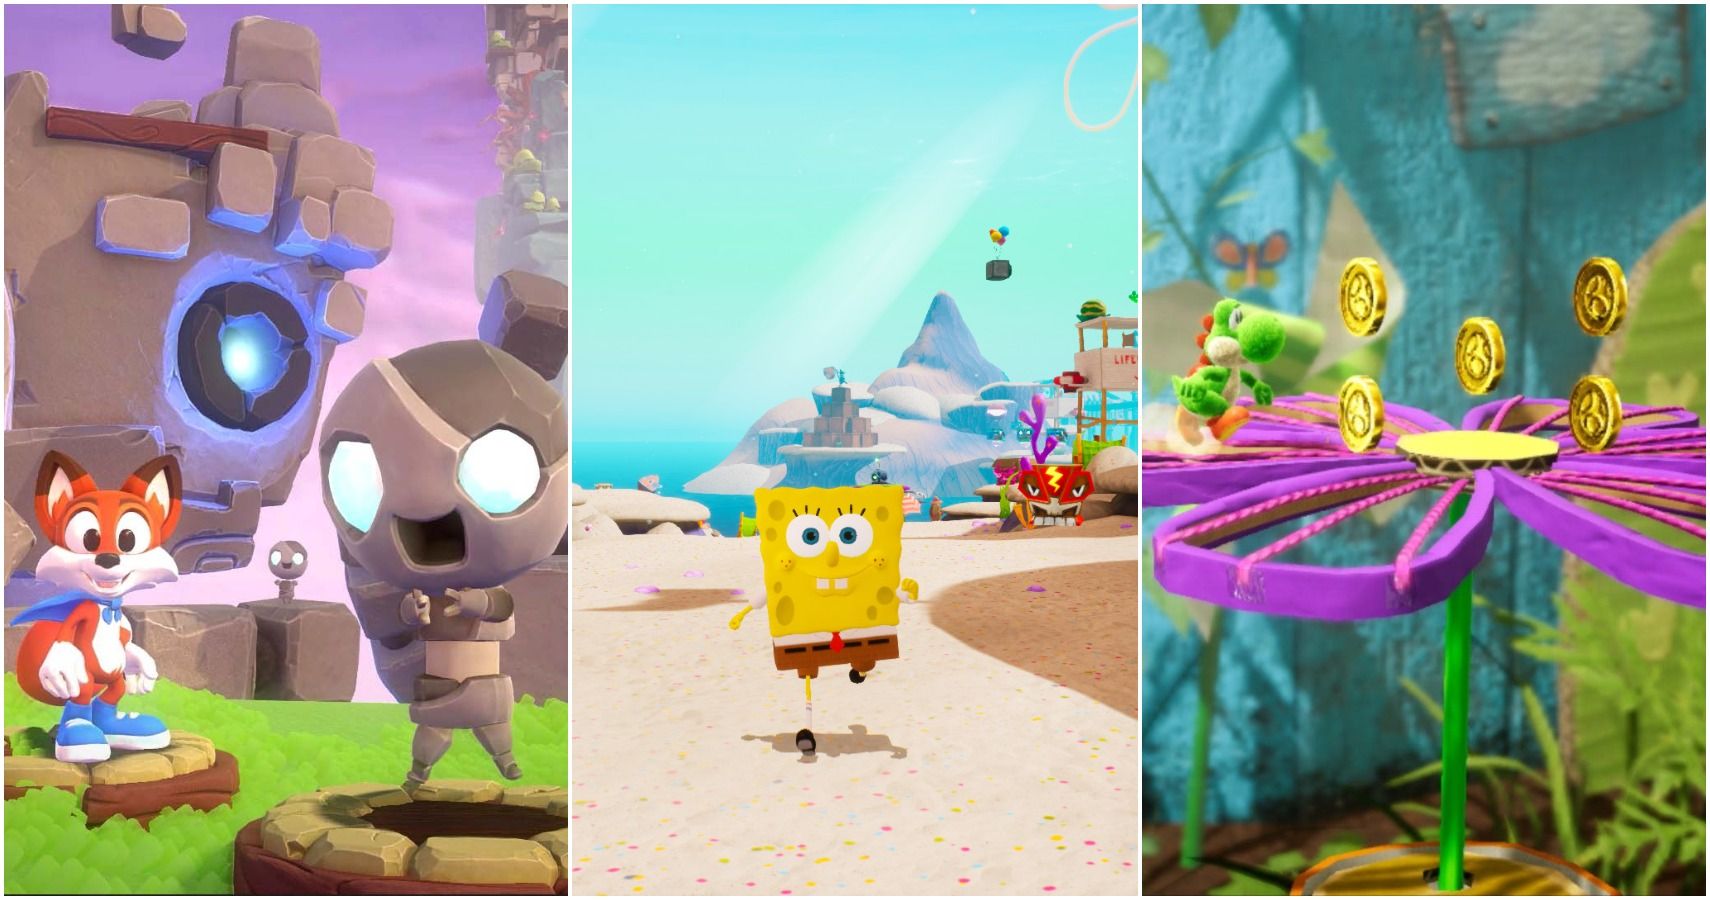 Images from Super Lucky's Tale, Battle For Bikini Bottom, and Yoshi's Crafted World